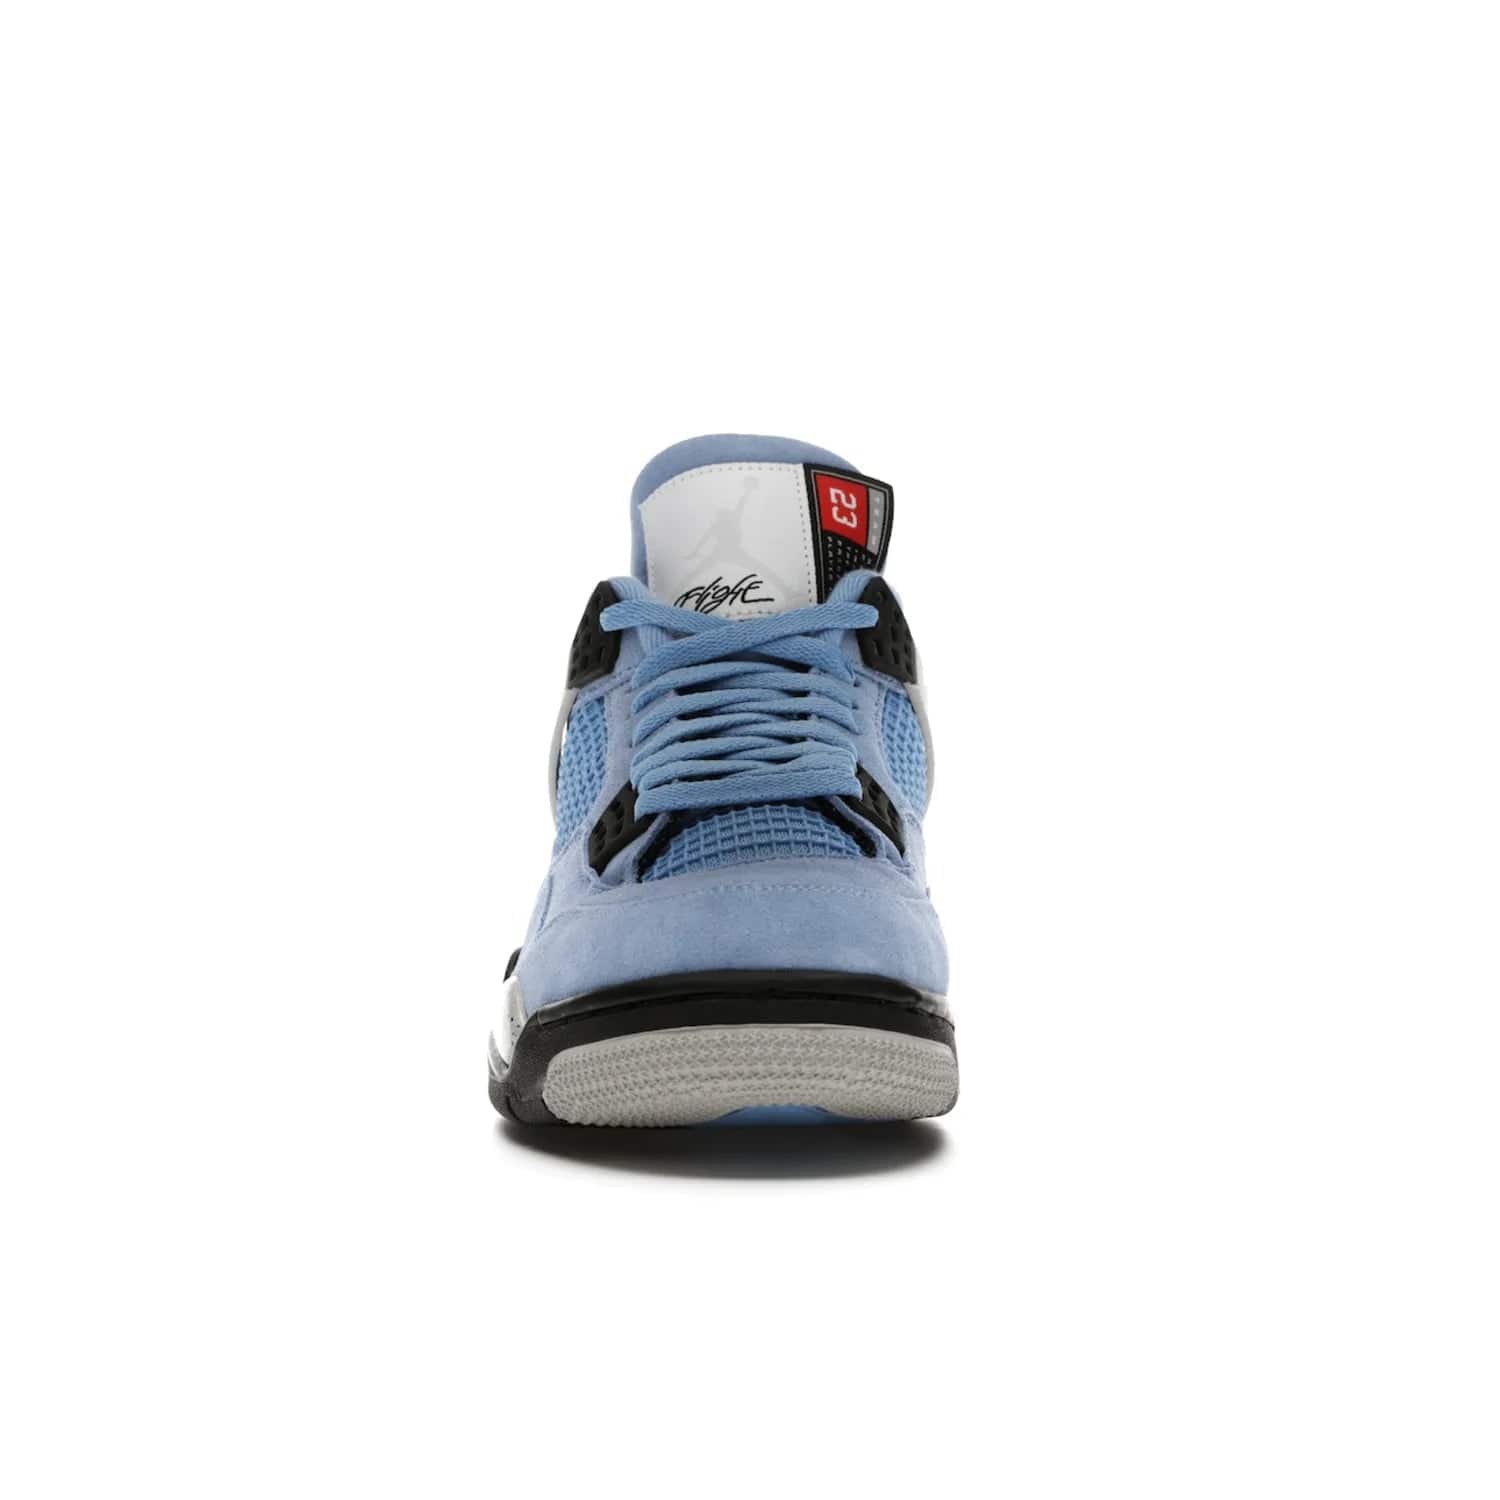 Jordan 4 Retro University Blue - Image 10 - Only at www.BallersClubKickz.com - The Air Jordan 4 University Blue honors MJ's alma mater. Rich University Blue suede, panels of netting, and Cement Grey speckled eyelets give this design an edgy look. Features a black, white and Tech Grey sole with a clear Air unit and two woven labels on the tongue. Jumpman logo & Team Jordan jock tag included. Released April 2021.